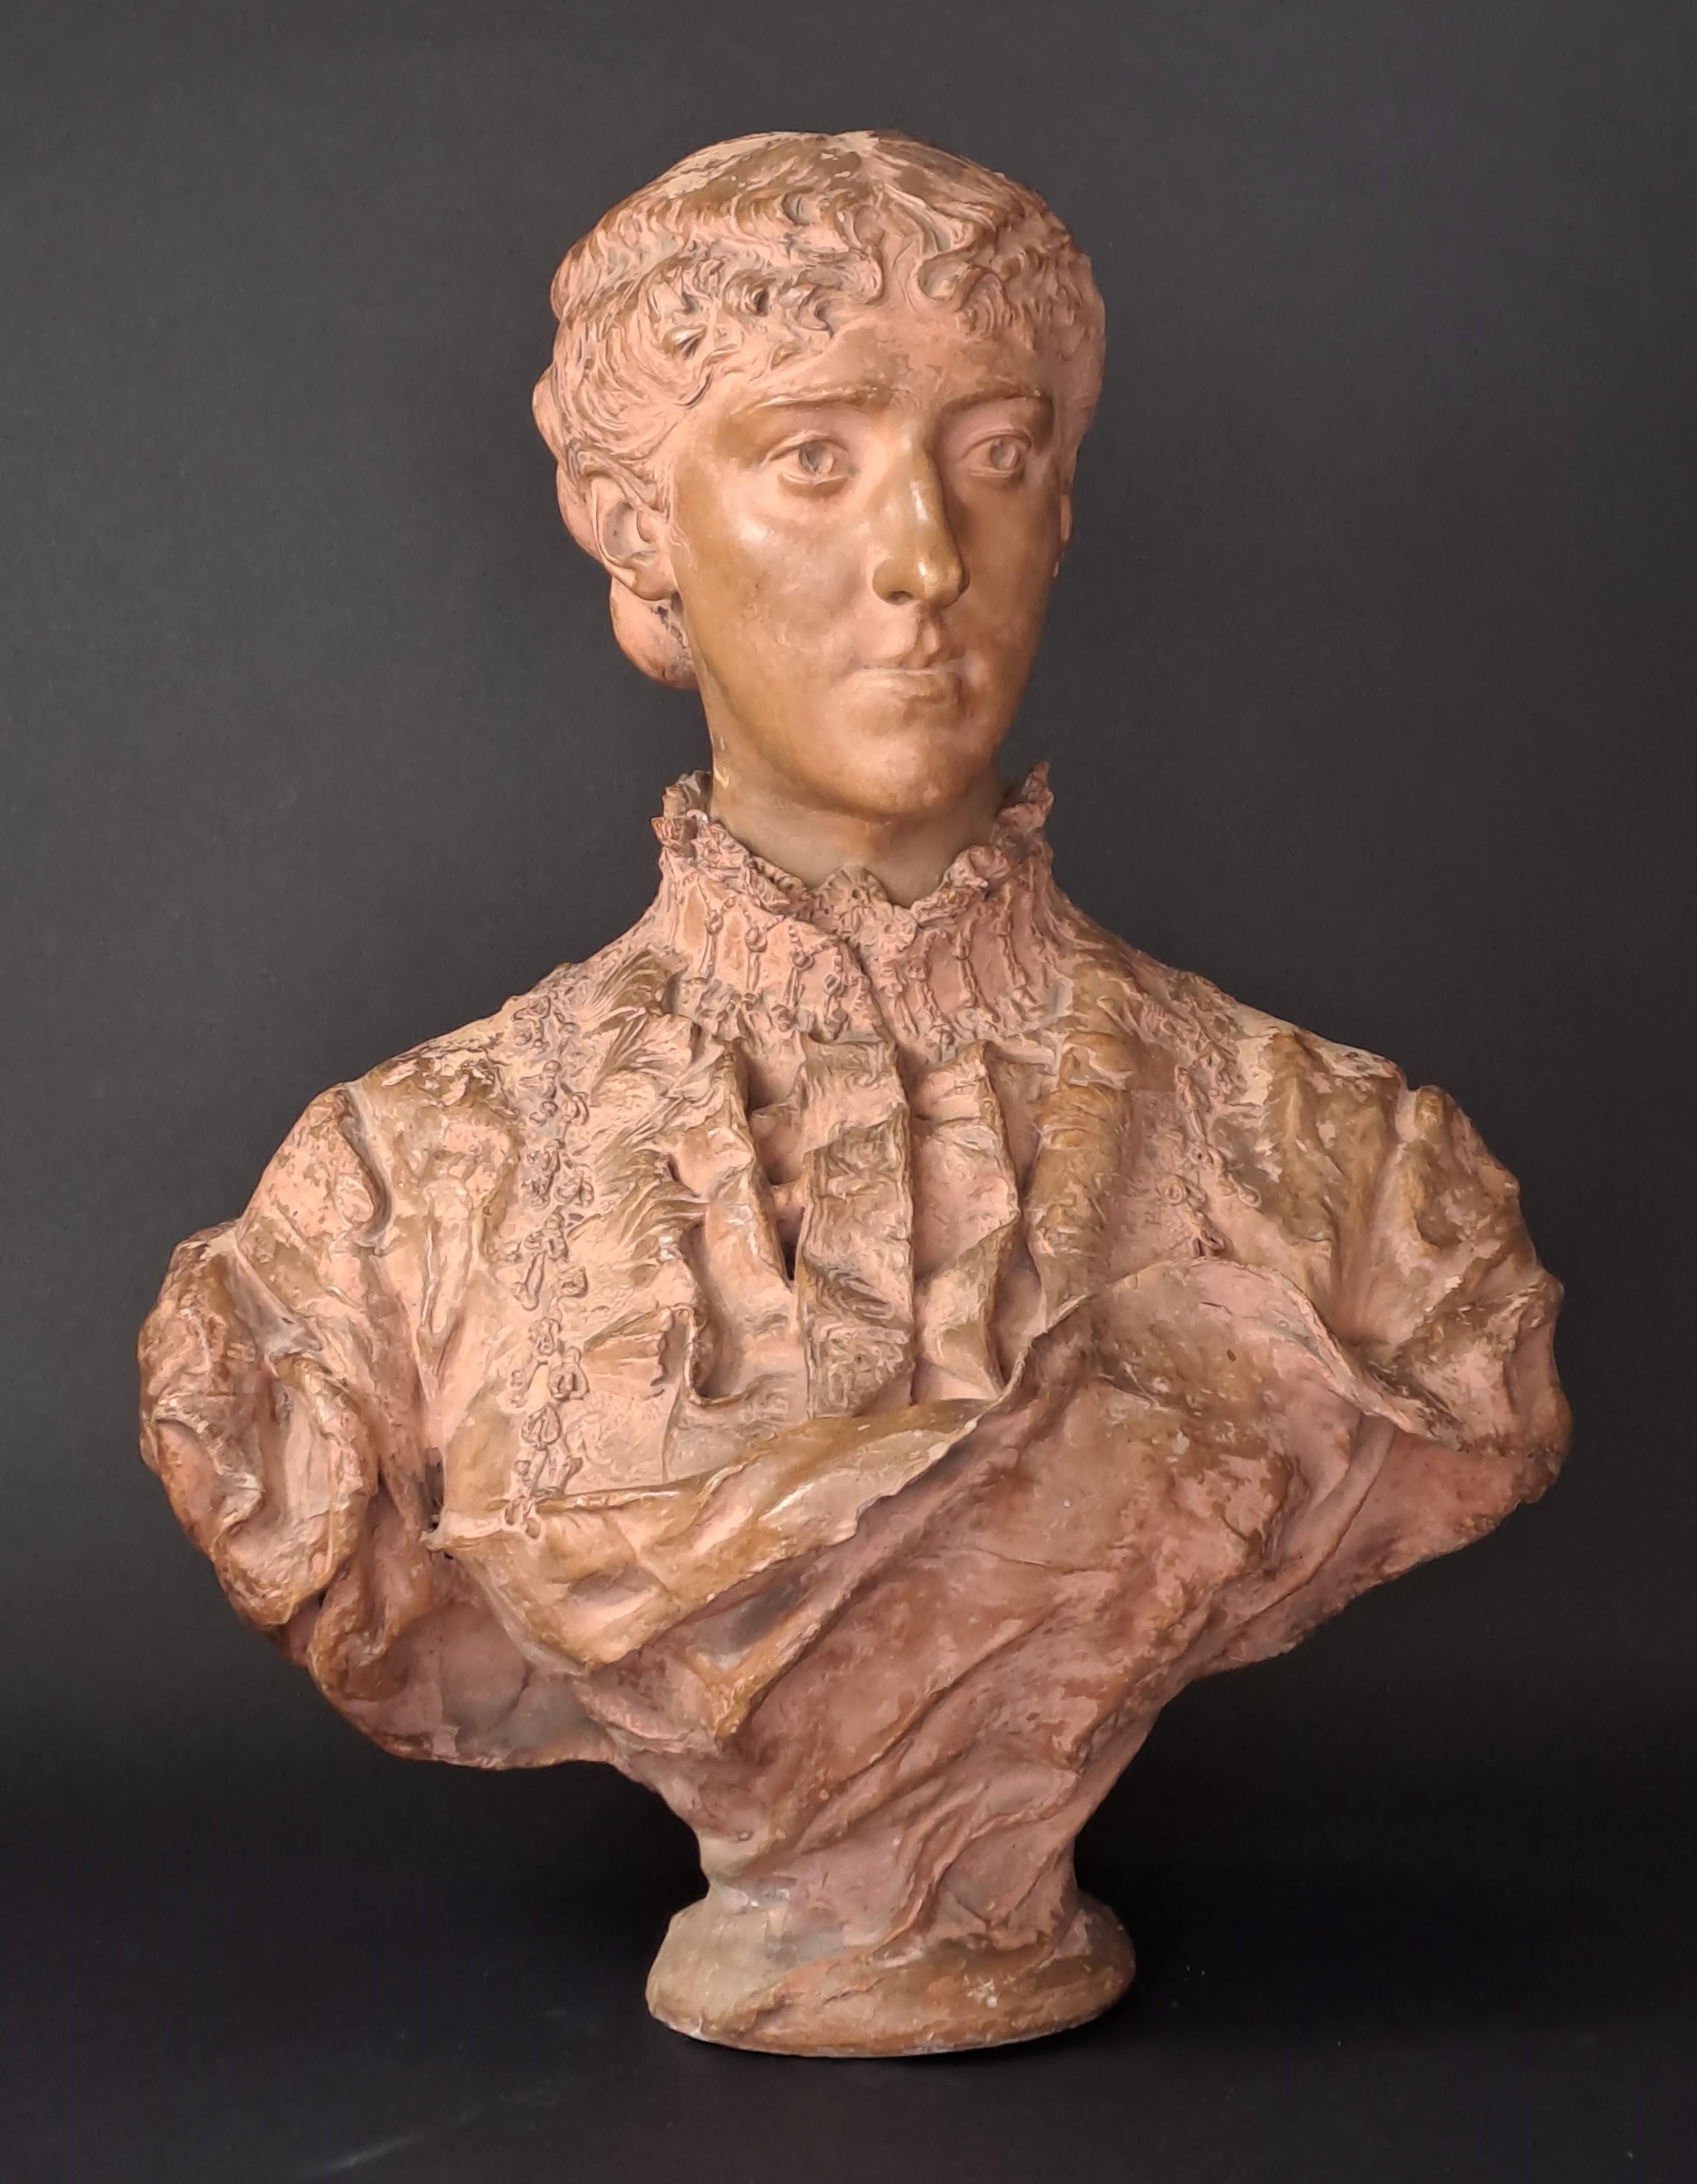 Denys Puech (1854 – 1942)

Terracotta sculpture depicting a beautiful, elegant woman in her Sunday best from the french provincial bourgeoisie.

Rare original work on the market, superbly executed by the Aveyron artist in 1882, 2 years before he won